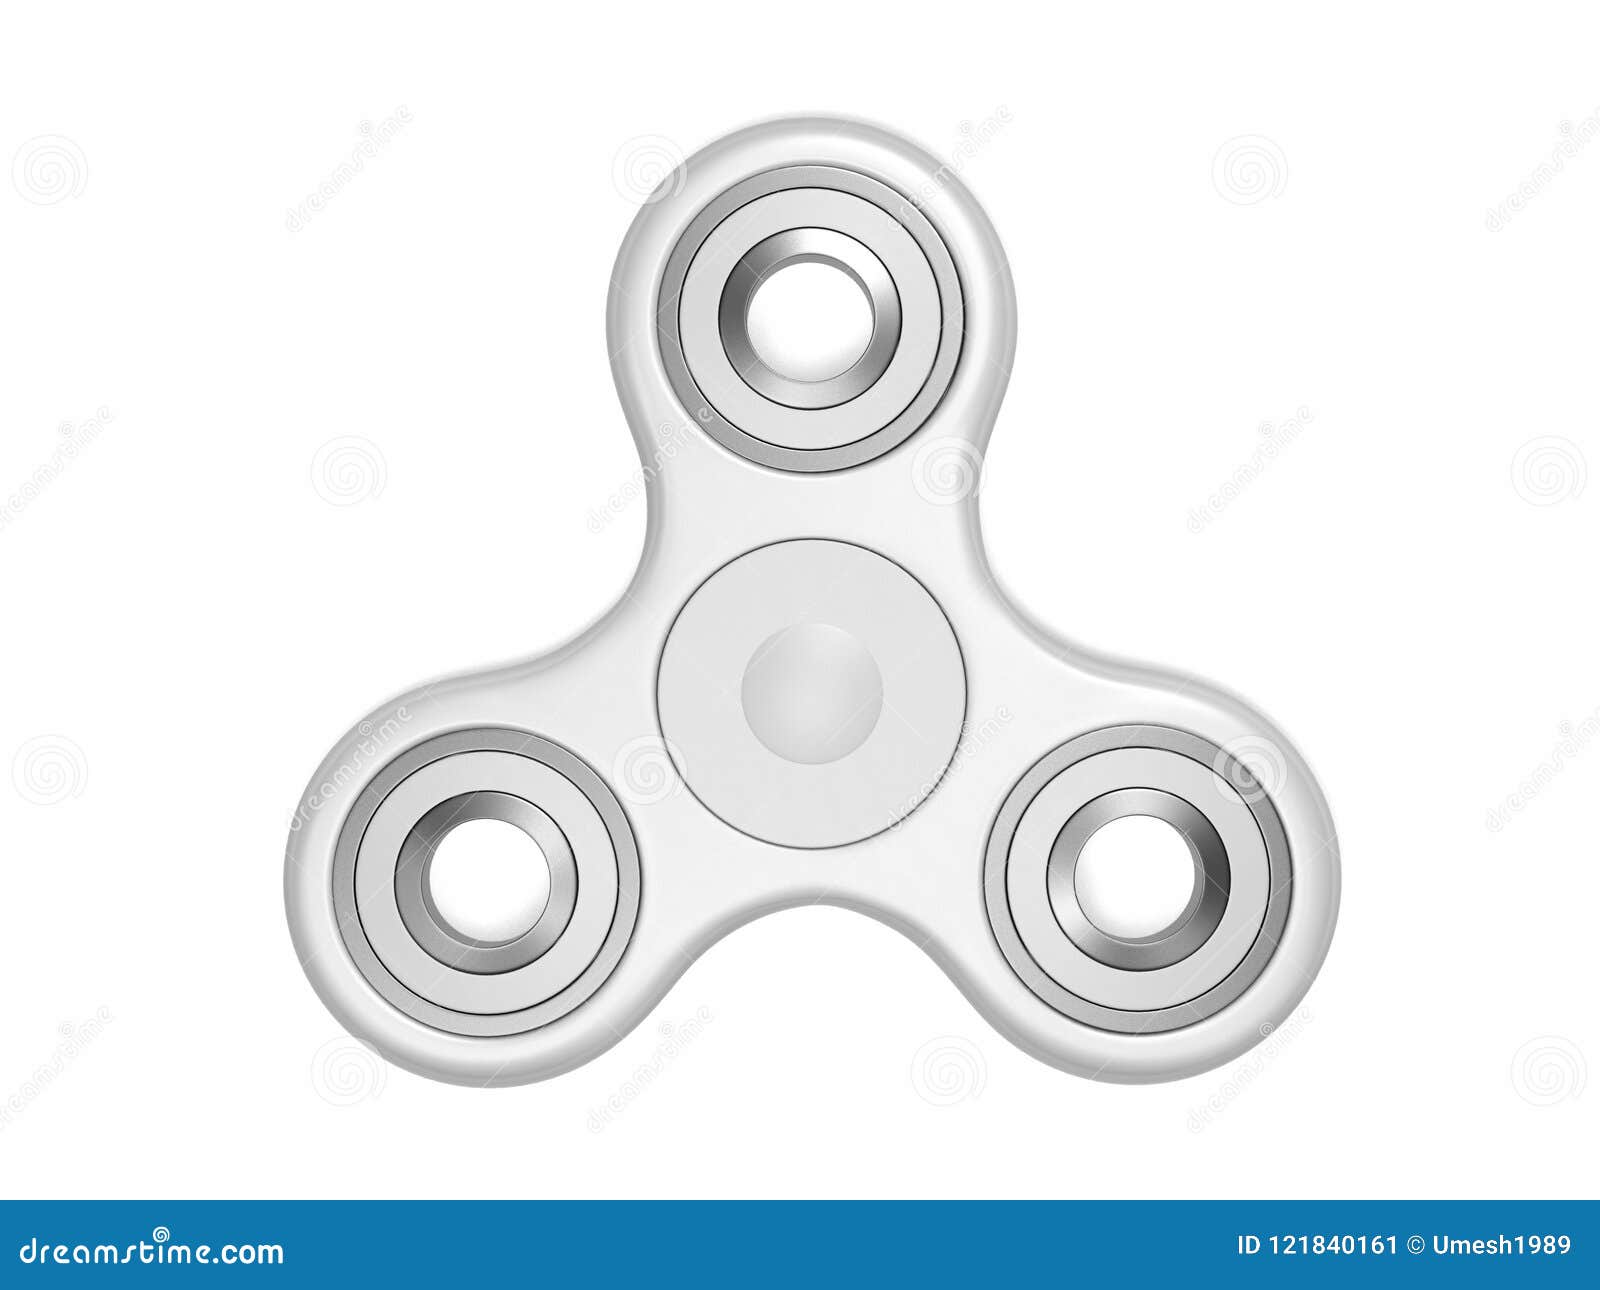 Blank Fidget Spinner with Packaging Box Ready Your Print Design Mock Template. 3d Render Illustration. Stock - Illustration of relax, modern: 121840161